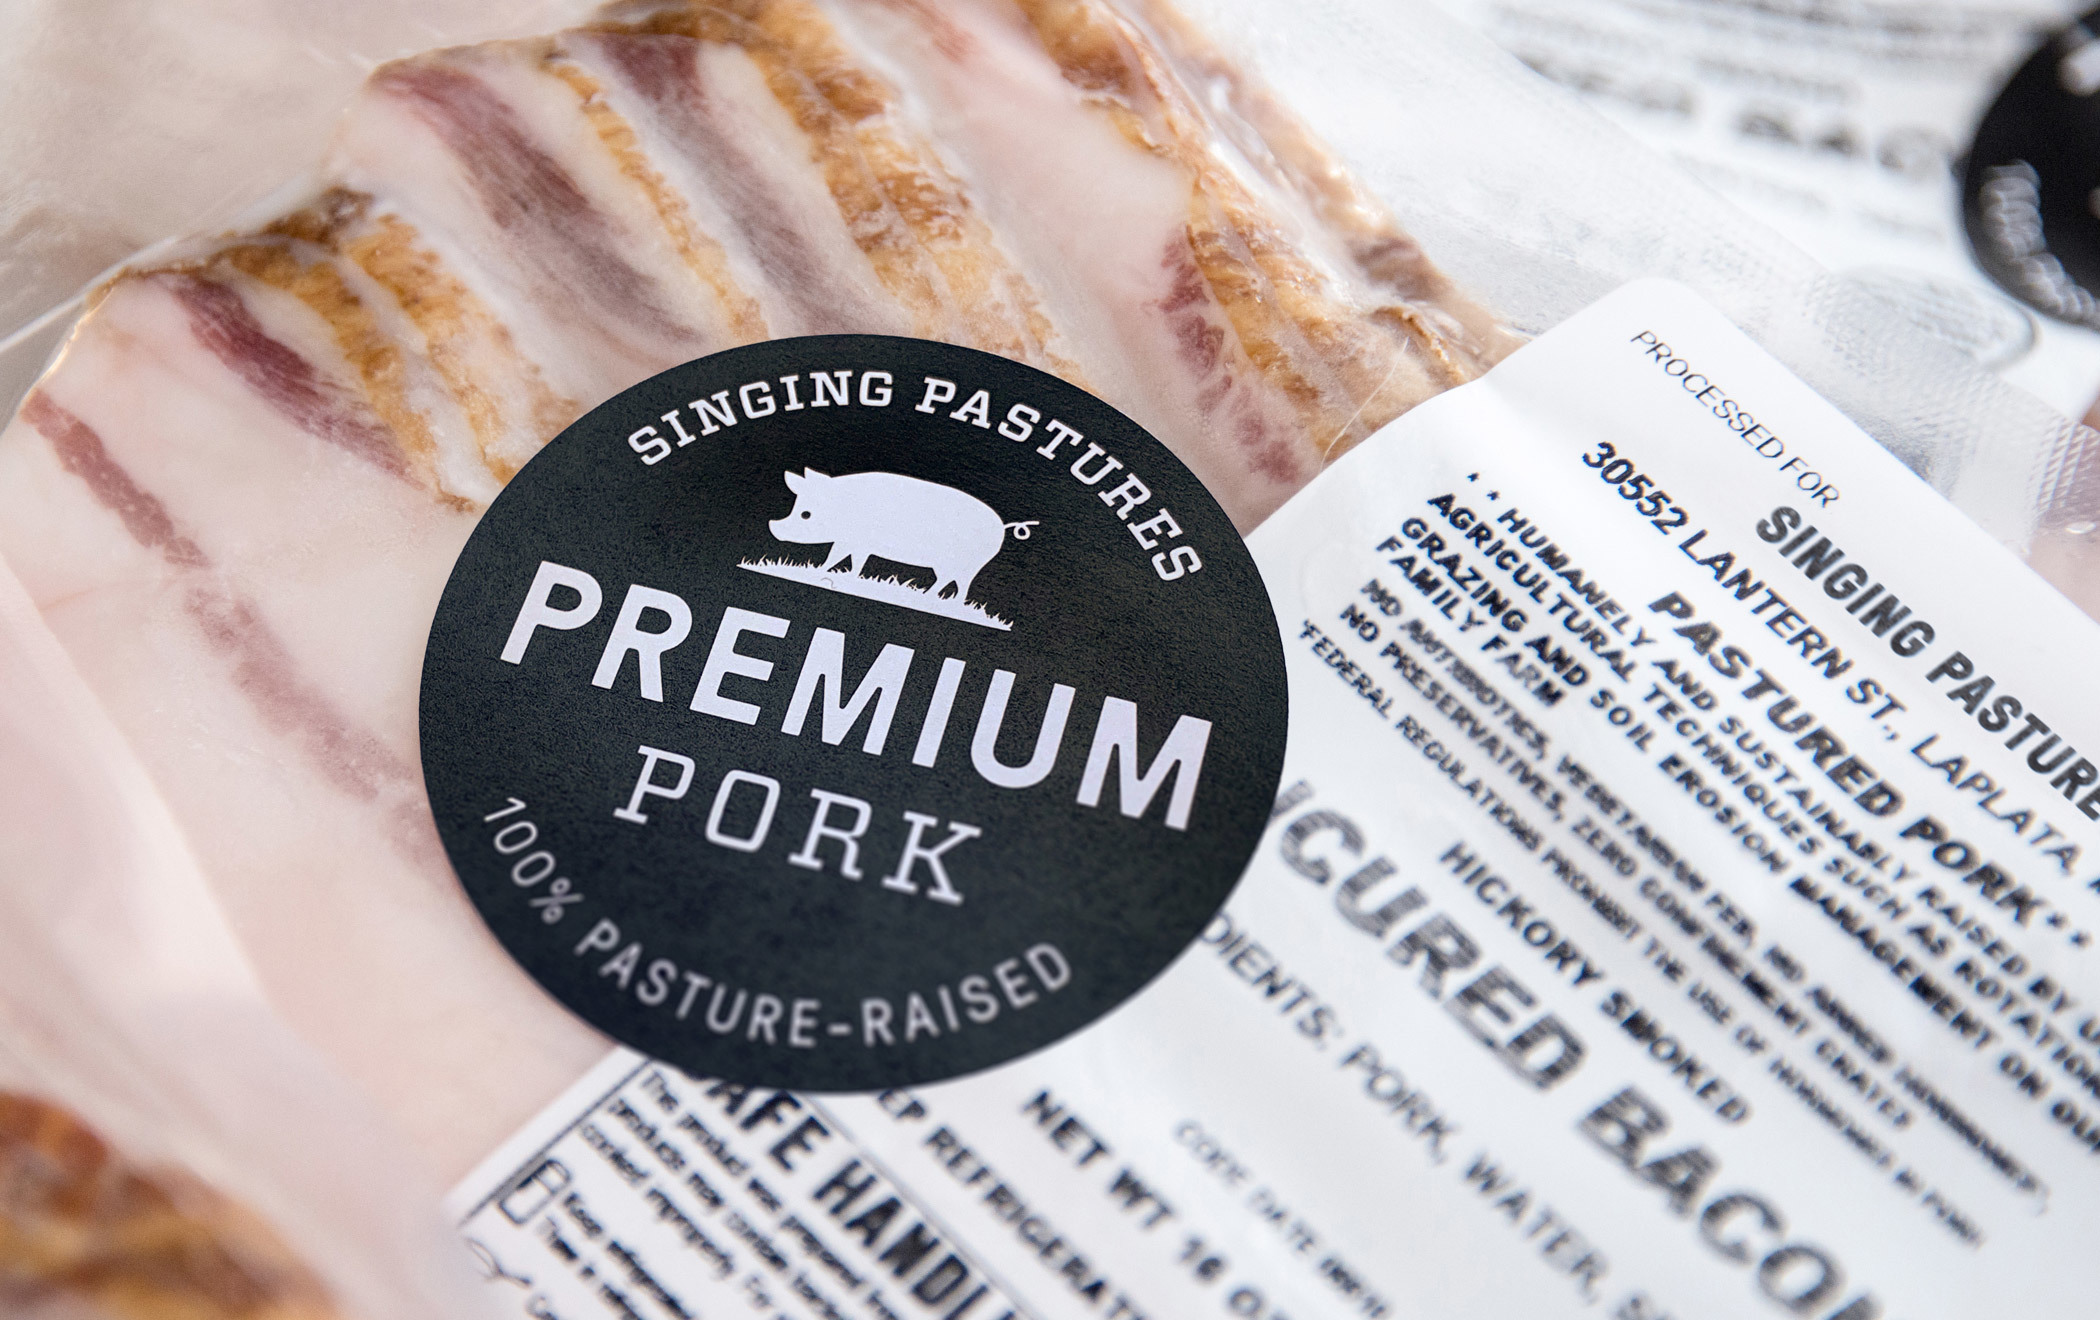 Close up a a Singing Pastures "Premium Pork" sticker affixed to a package of uncured, hickory smoked bacon. 